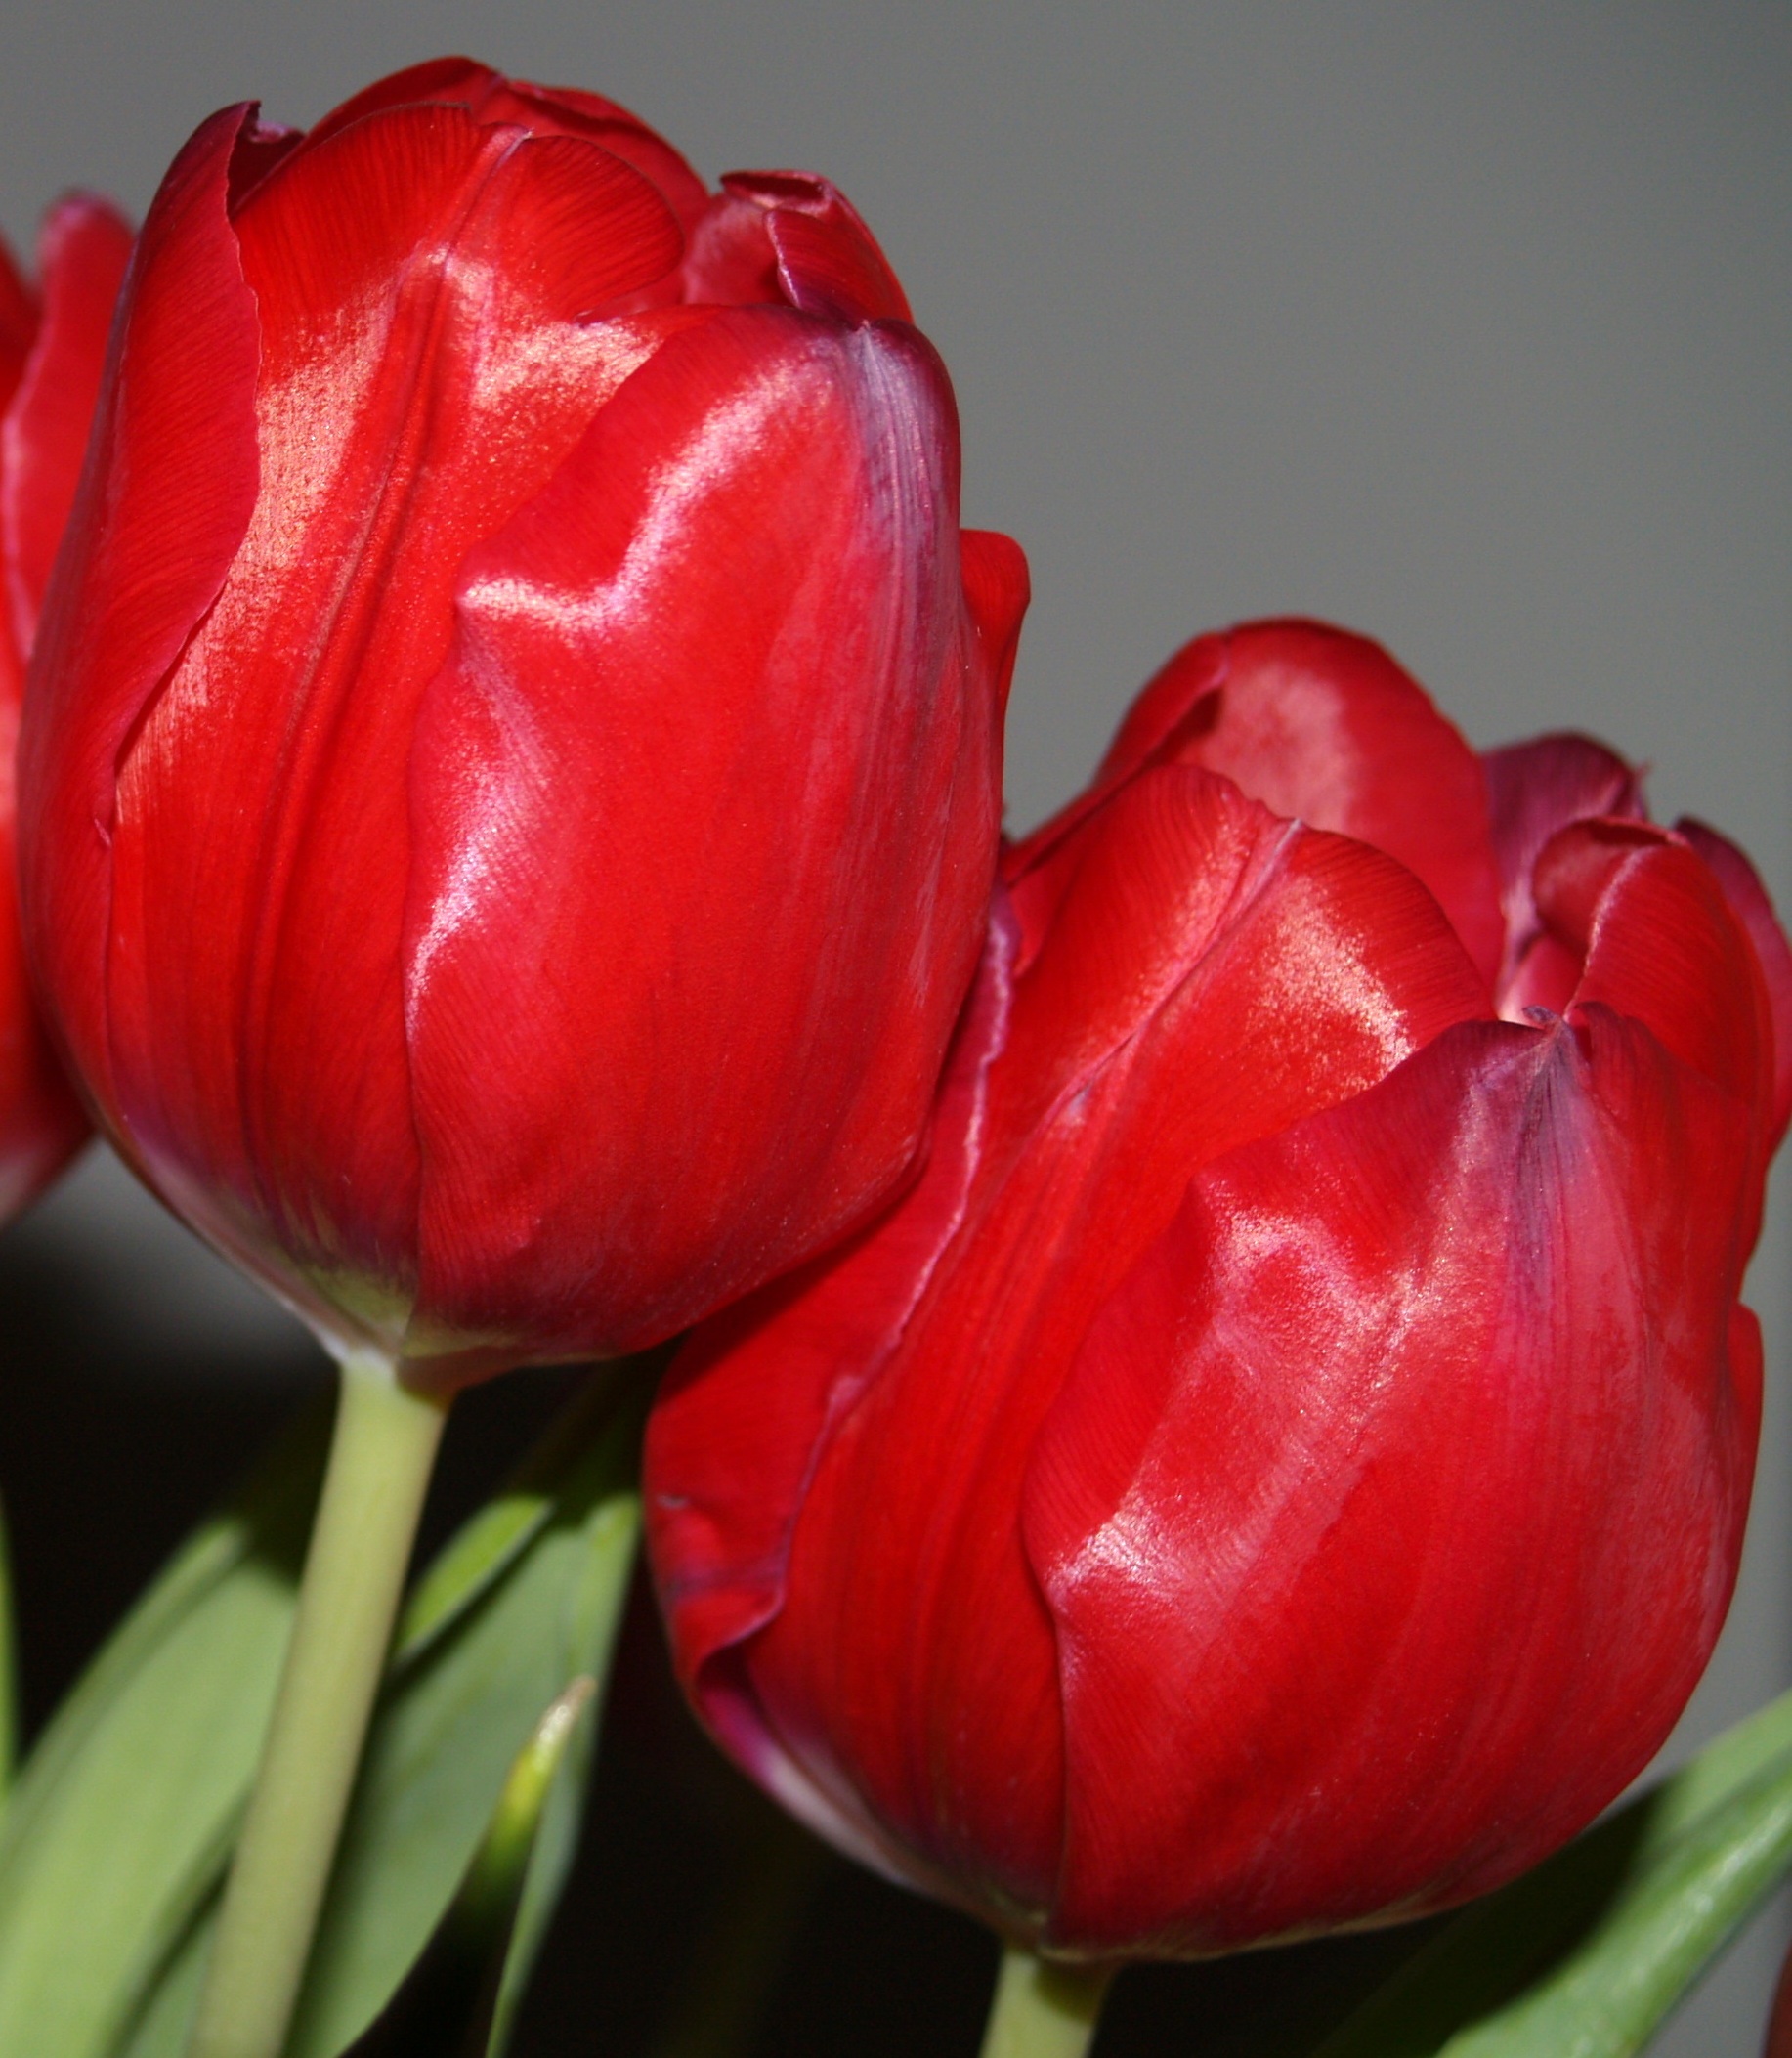 Red shiny tulips free image download